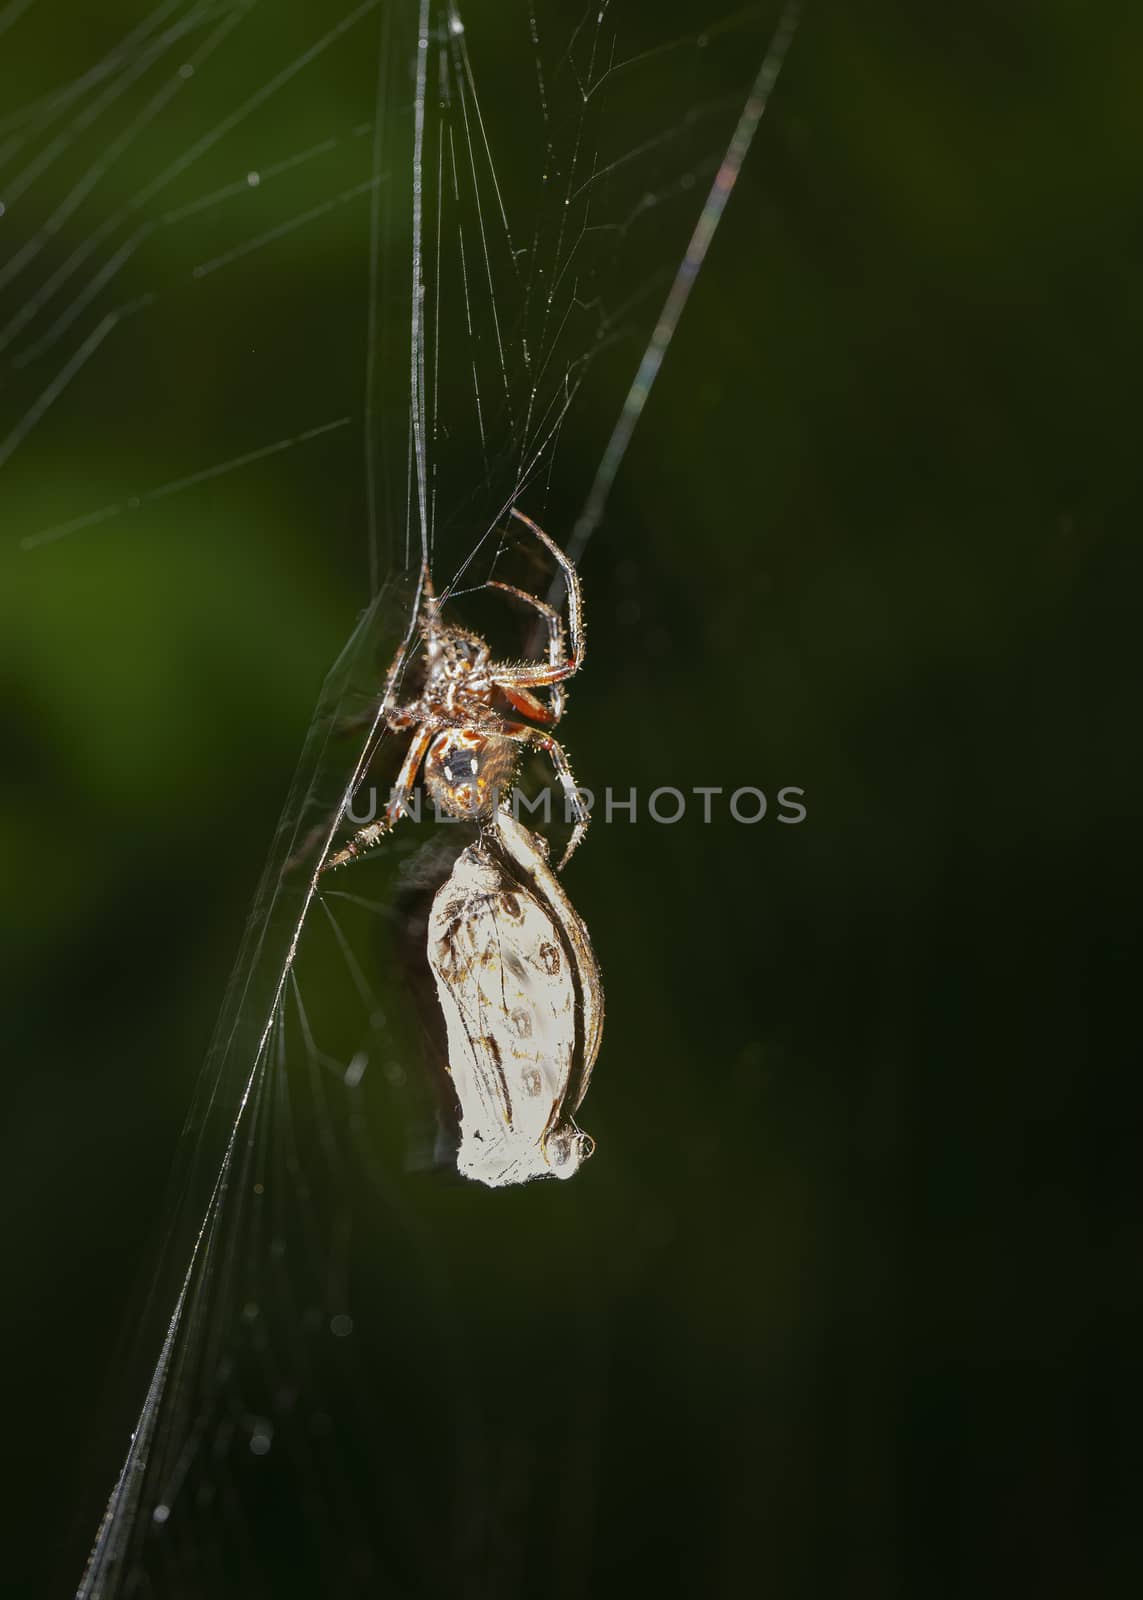 Spider Catches a Moth by CharlieFloyd